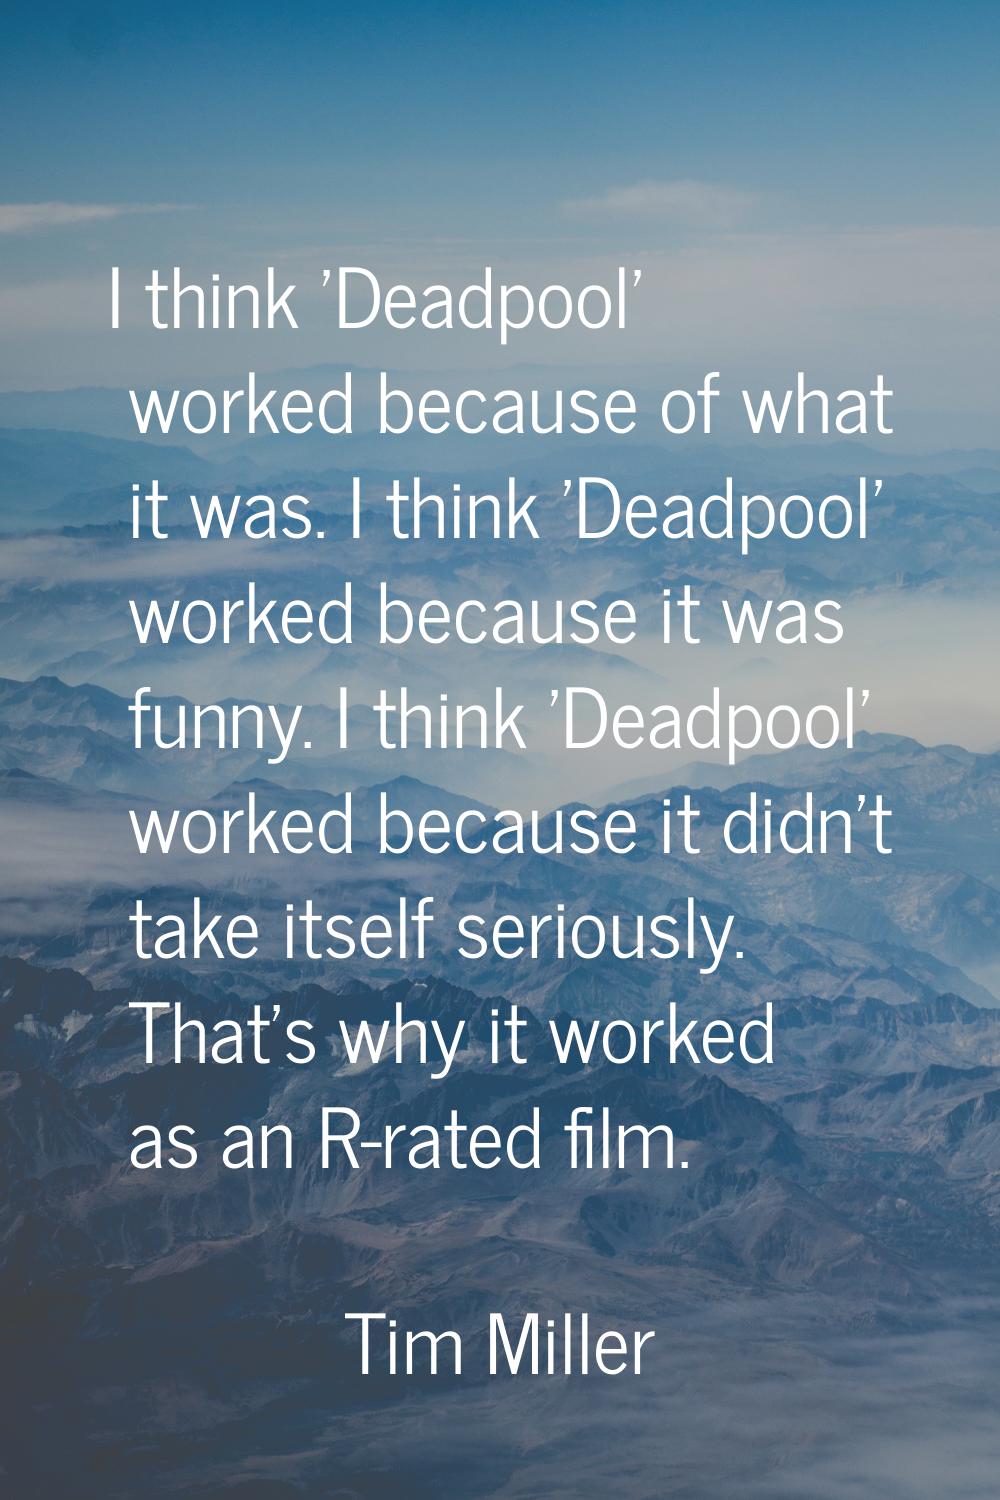 I think 'Deadpool' worked because of what it was. I think 'Deadpool' worked because it was funny. I